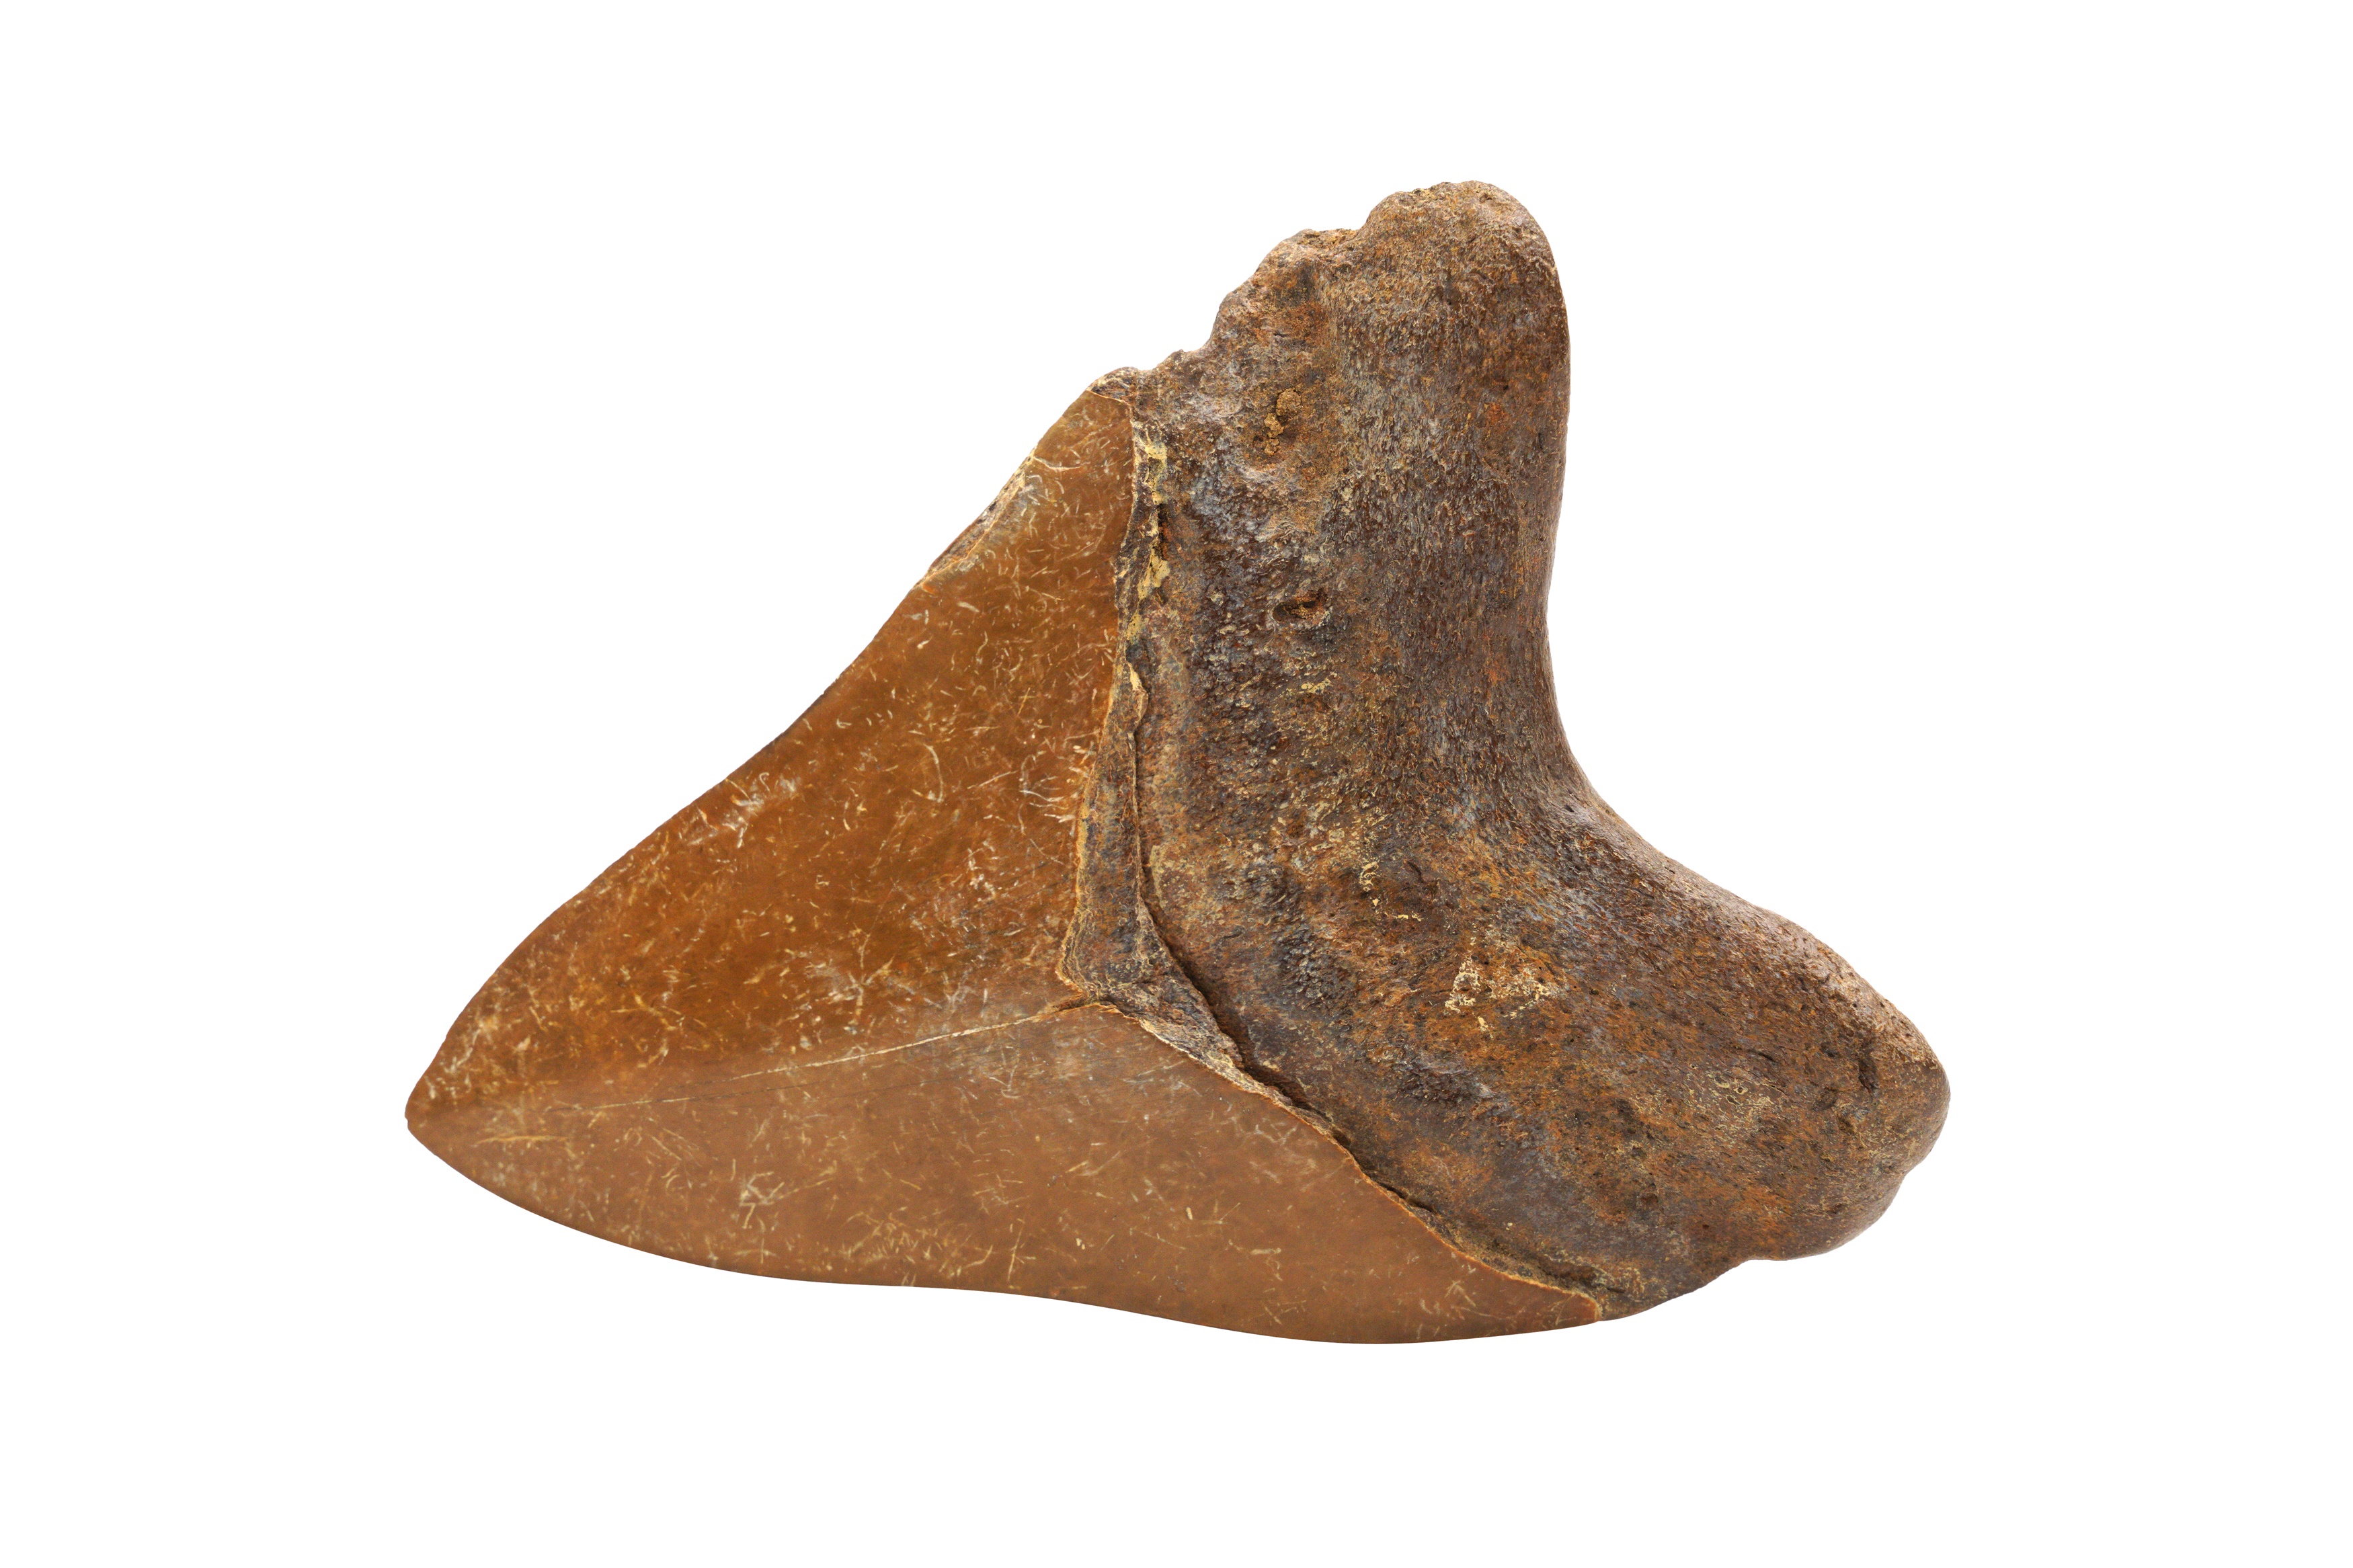 A BROWN RIVER MEGALODON SHARK TOOTH FOSSIL - Image 2 of 2